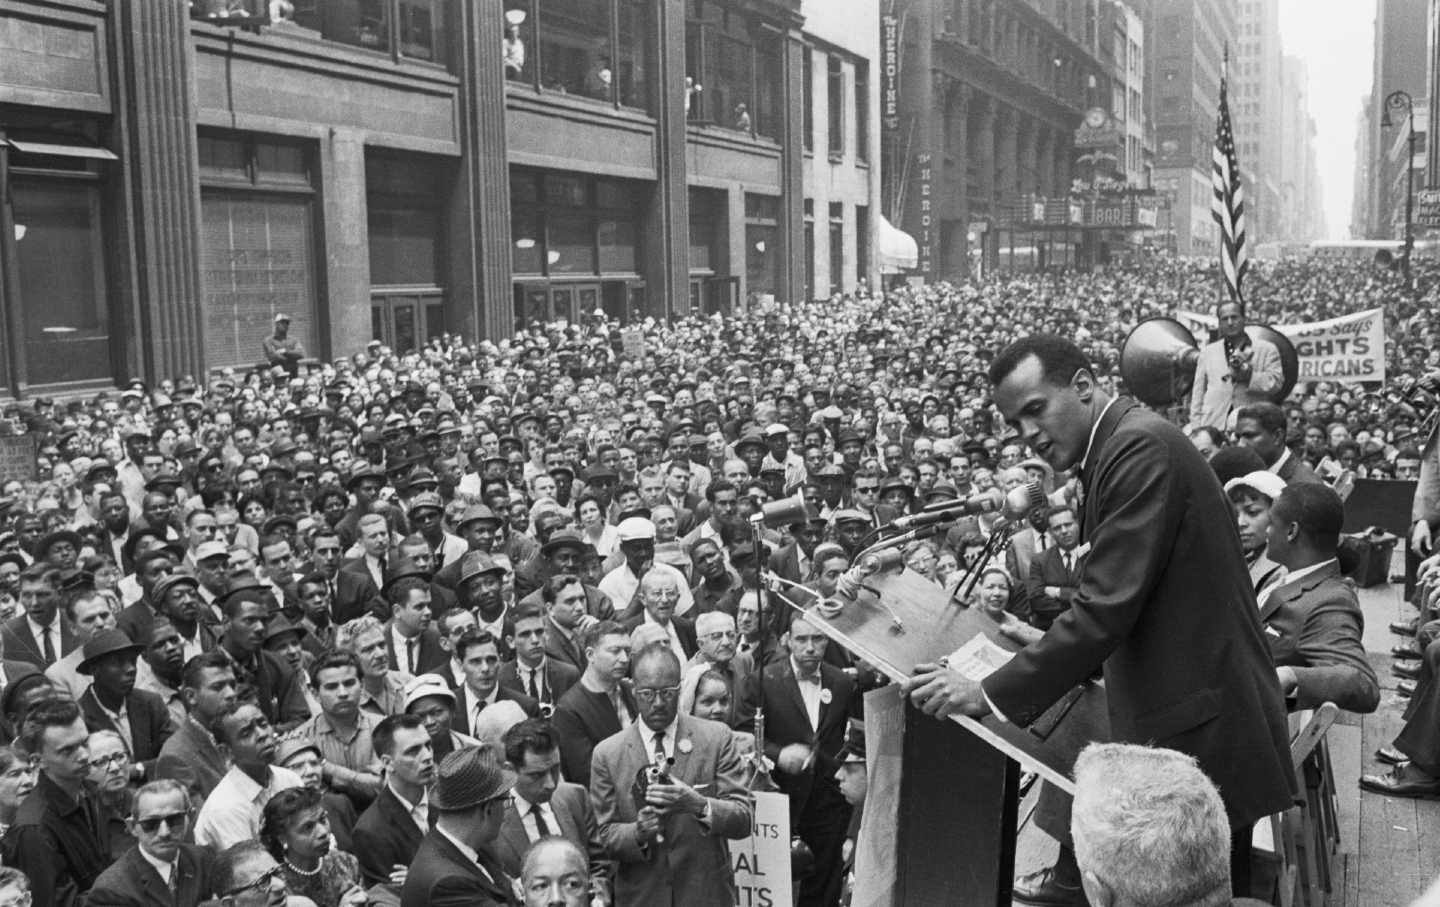 Harry Belafonte sings before a crowd at a civil rights rally.